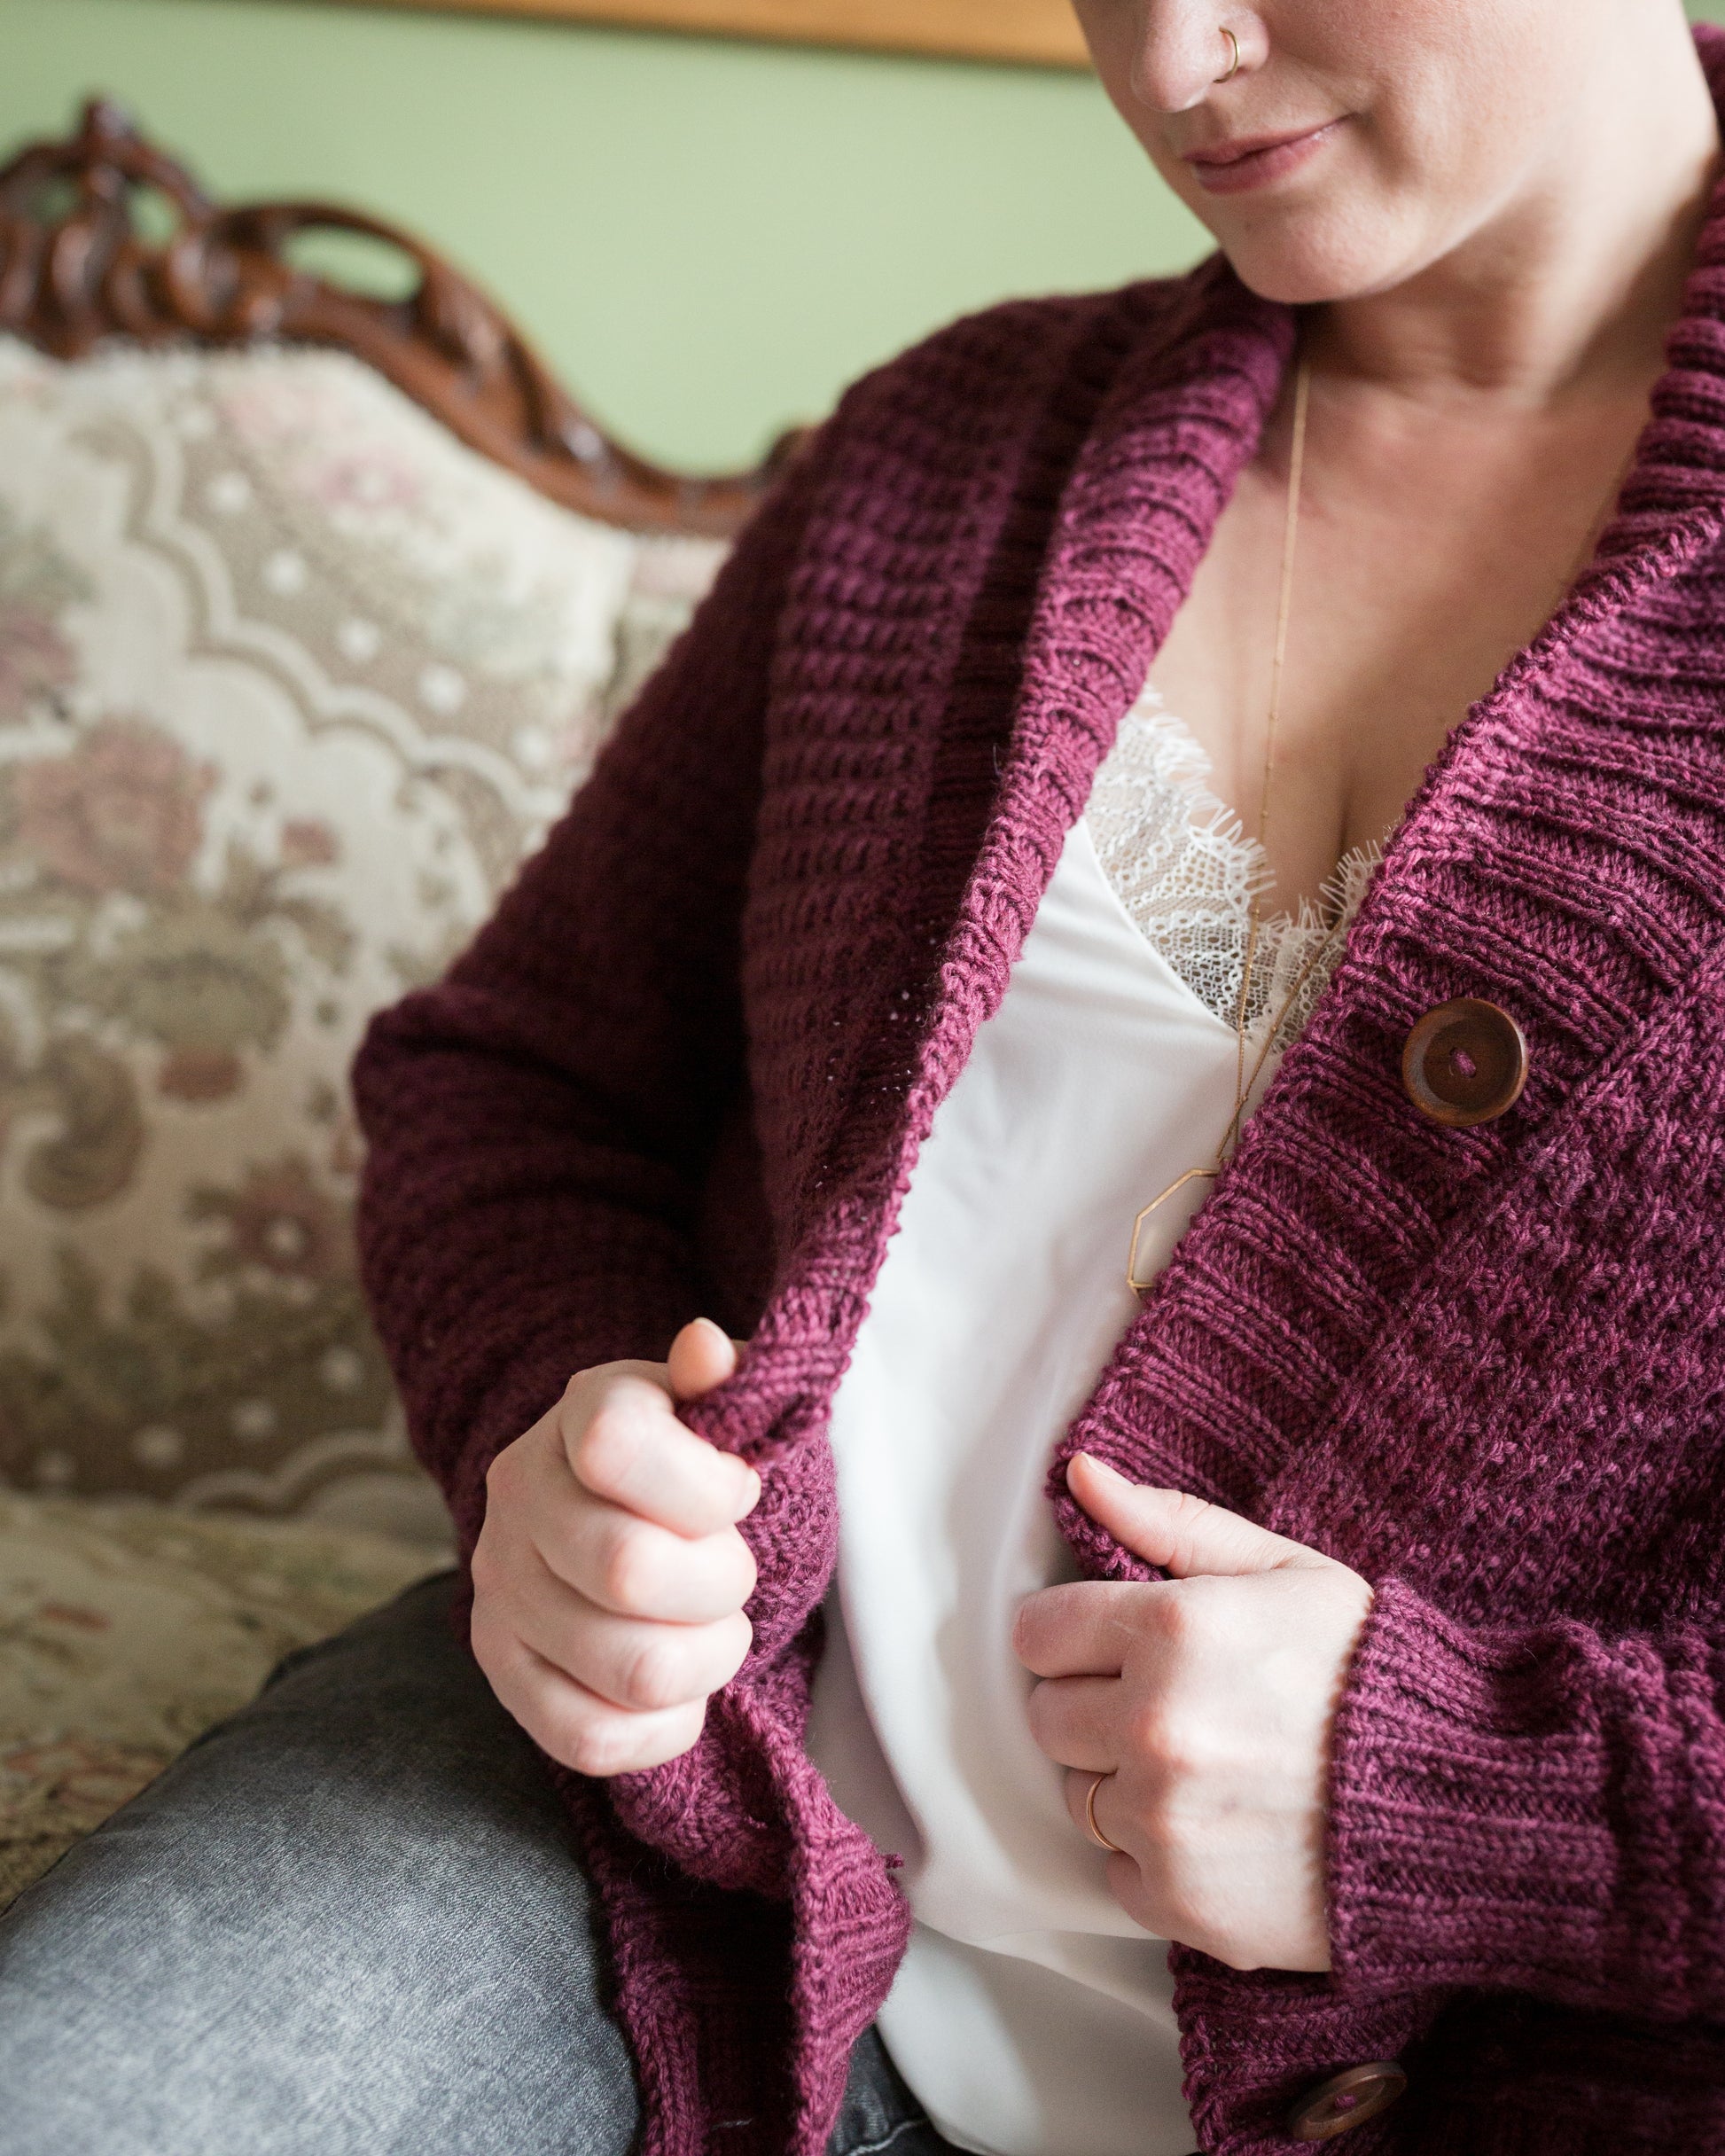 Seen from the shoulder down, Jen pulls the sides of a burgundy cardigan together, showing off the hand knit details of the large button band and subtle stitch pattern.